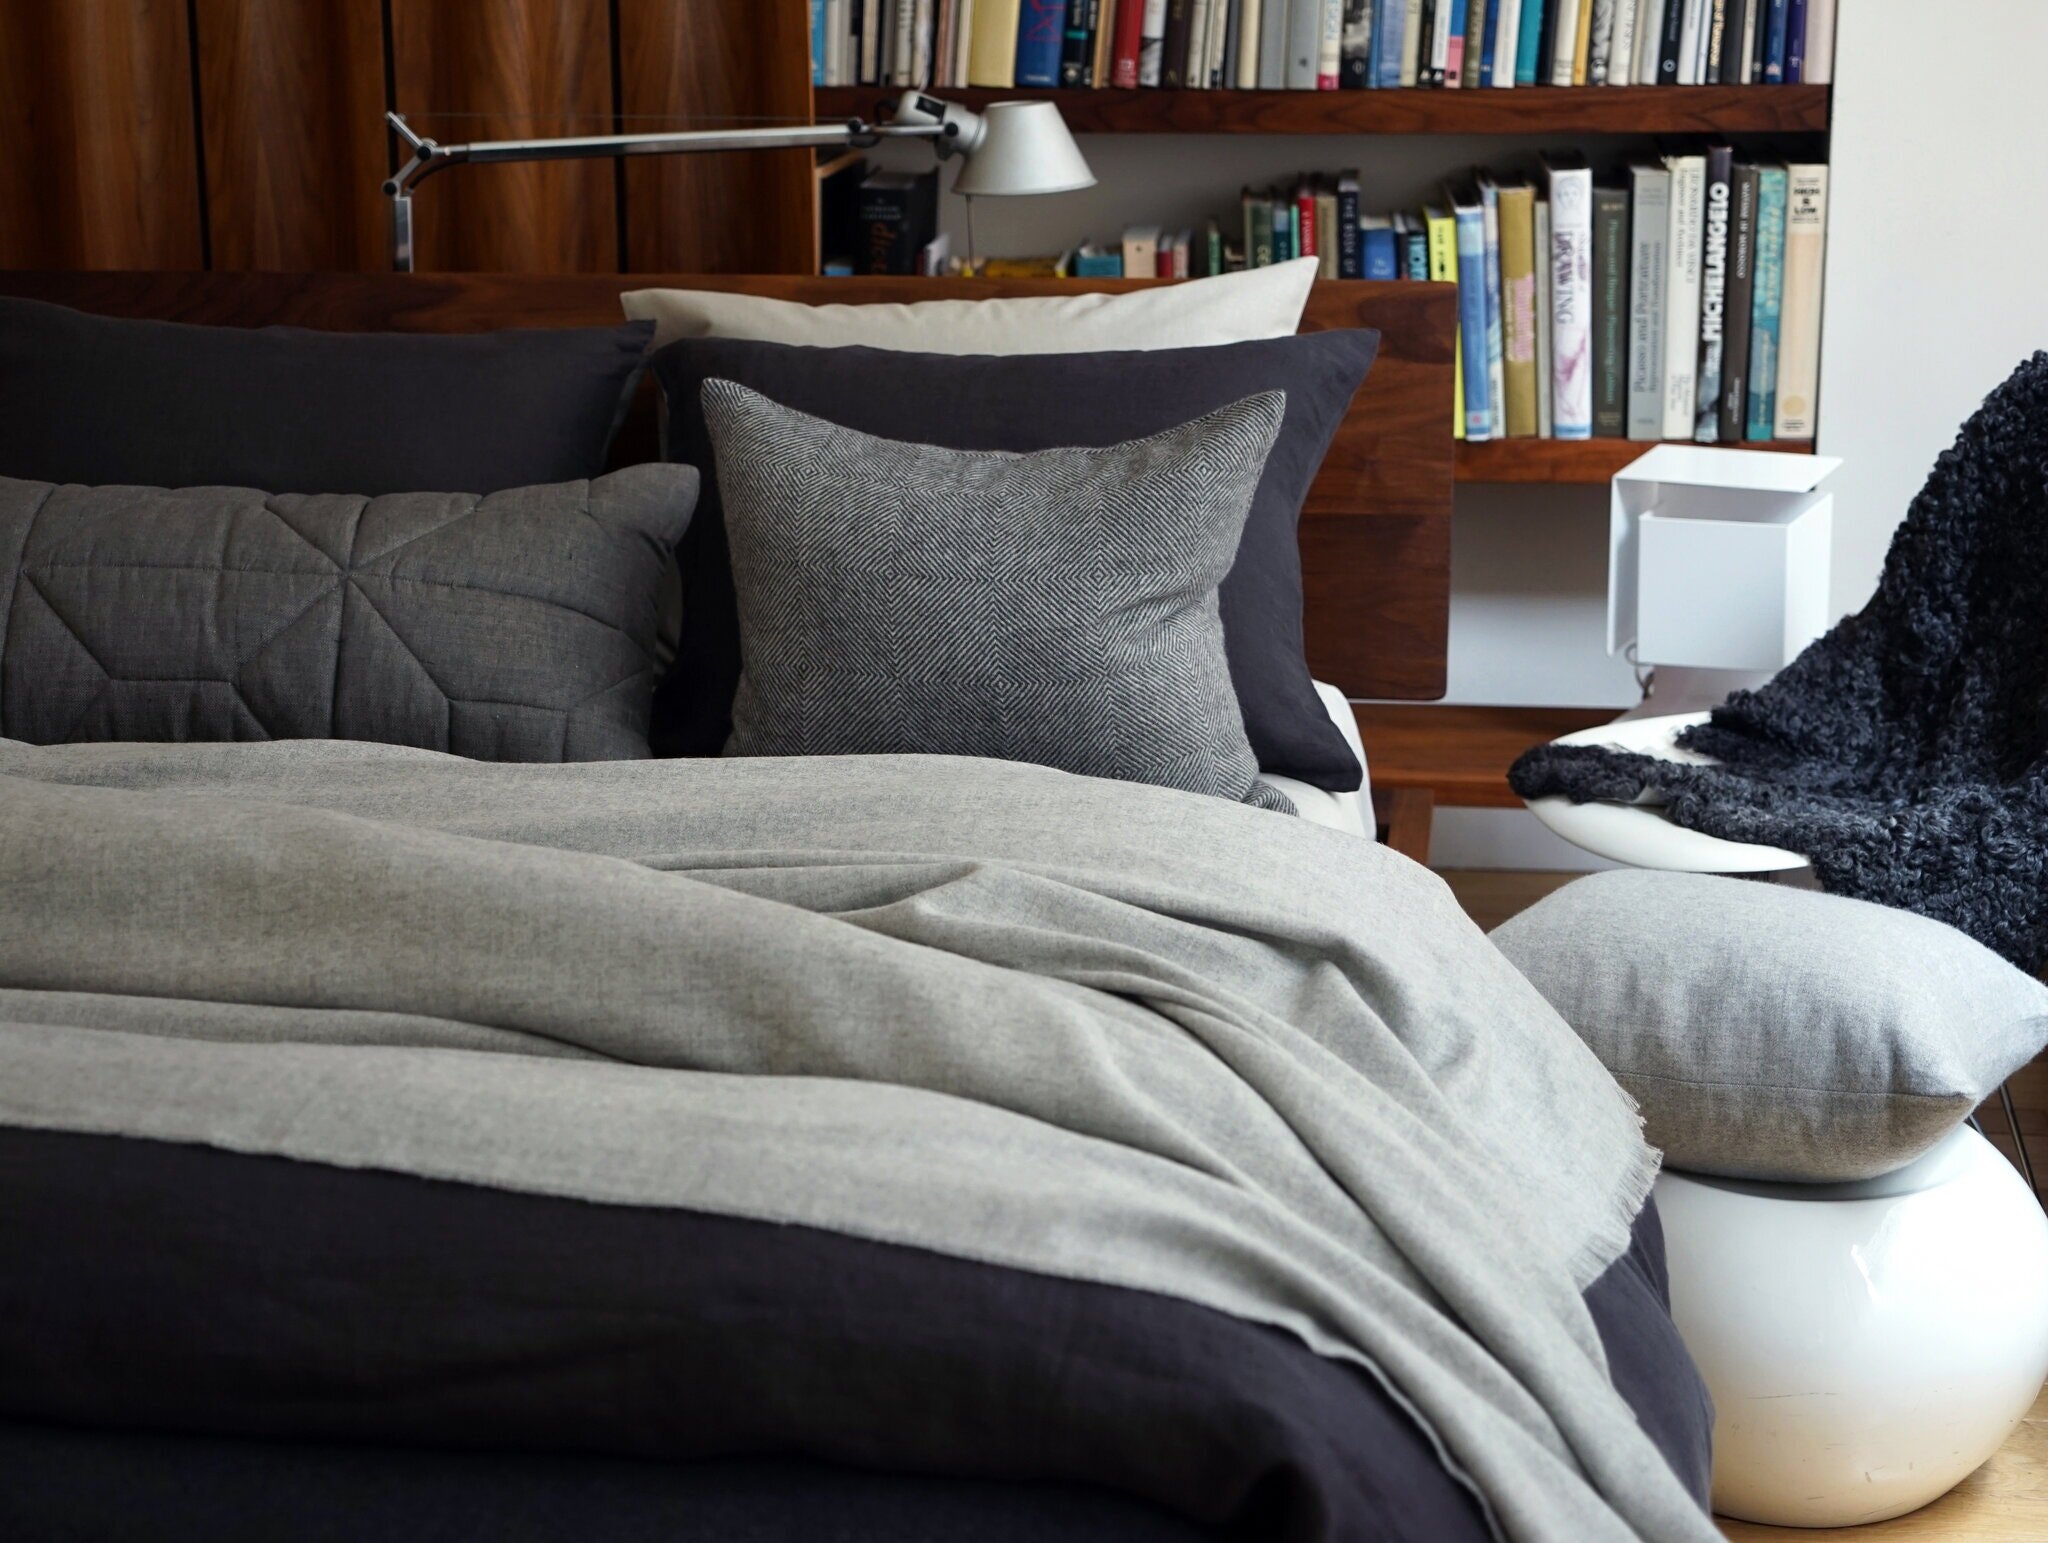  The way you dress your bed can change the feeling of a bedroom. Here, bedding and decorative pillows from Area, in shades of gray and various textures, create an inviting nest. Credit Courtesy of Area 